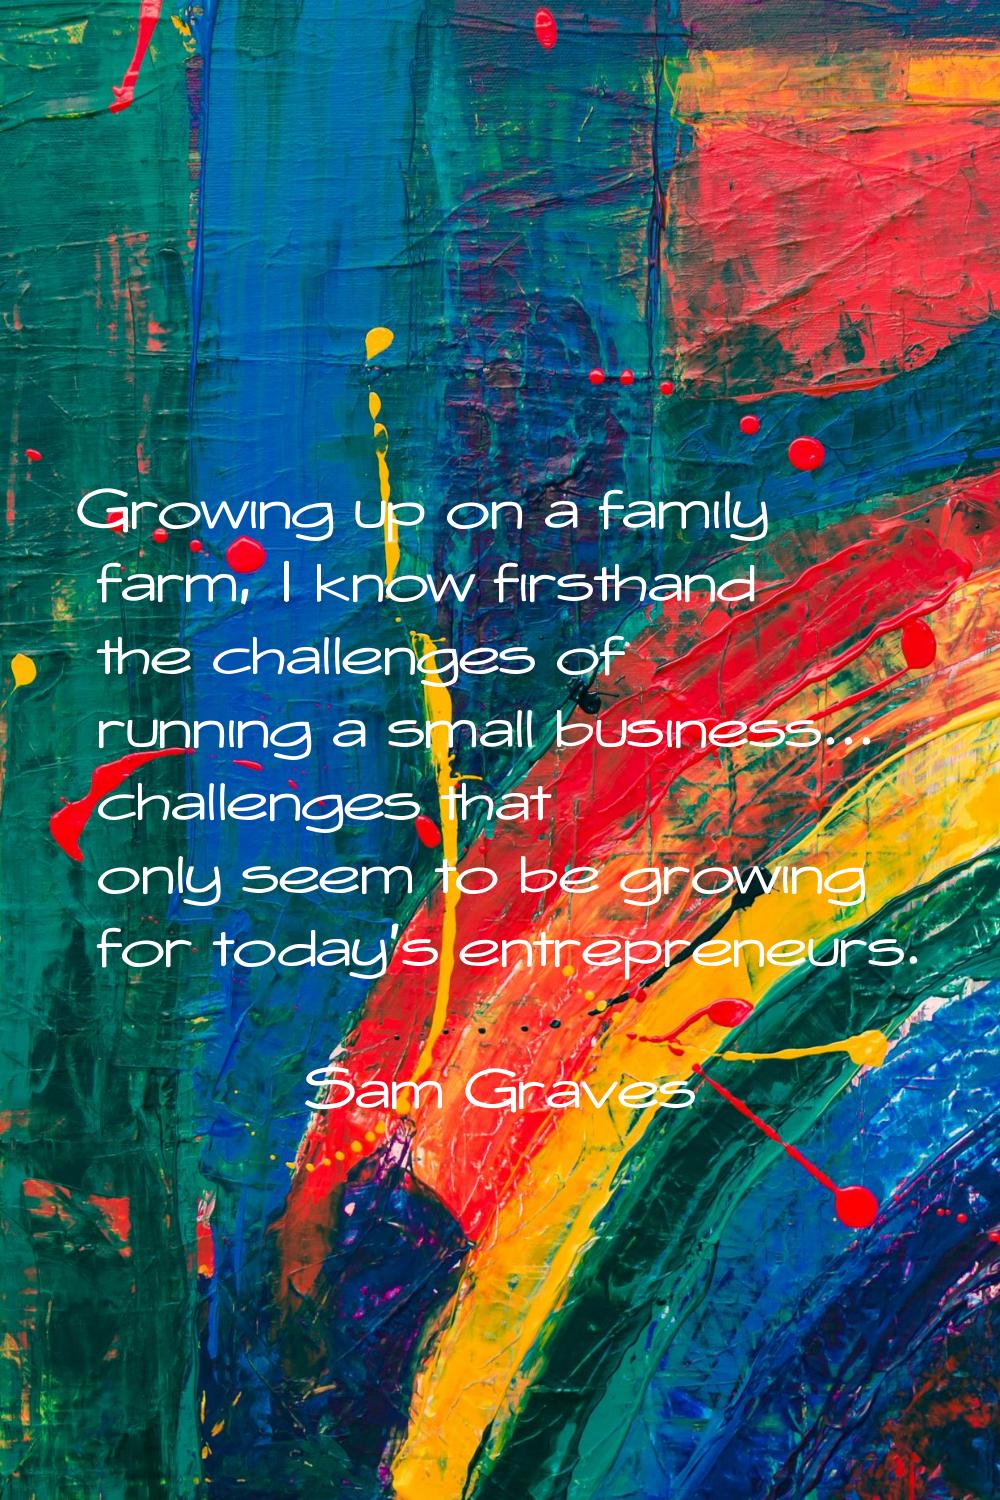 Growing up on a family farm, I know firsthand the challenges of running a small business... challen